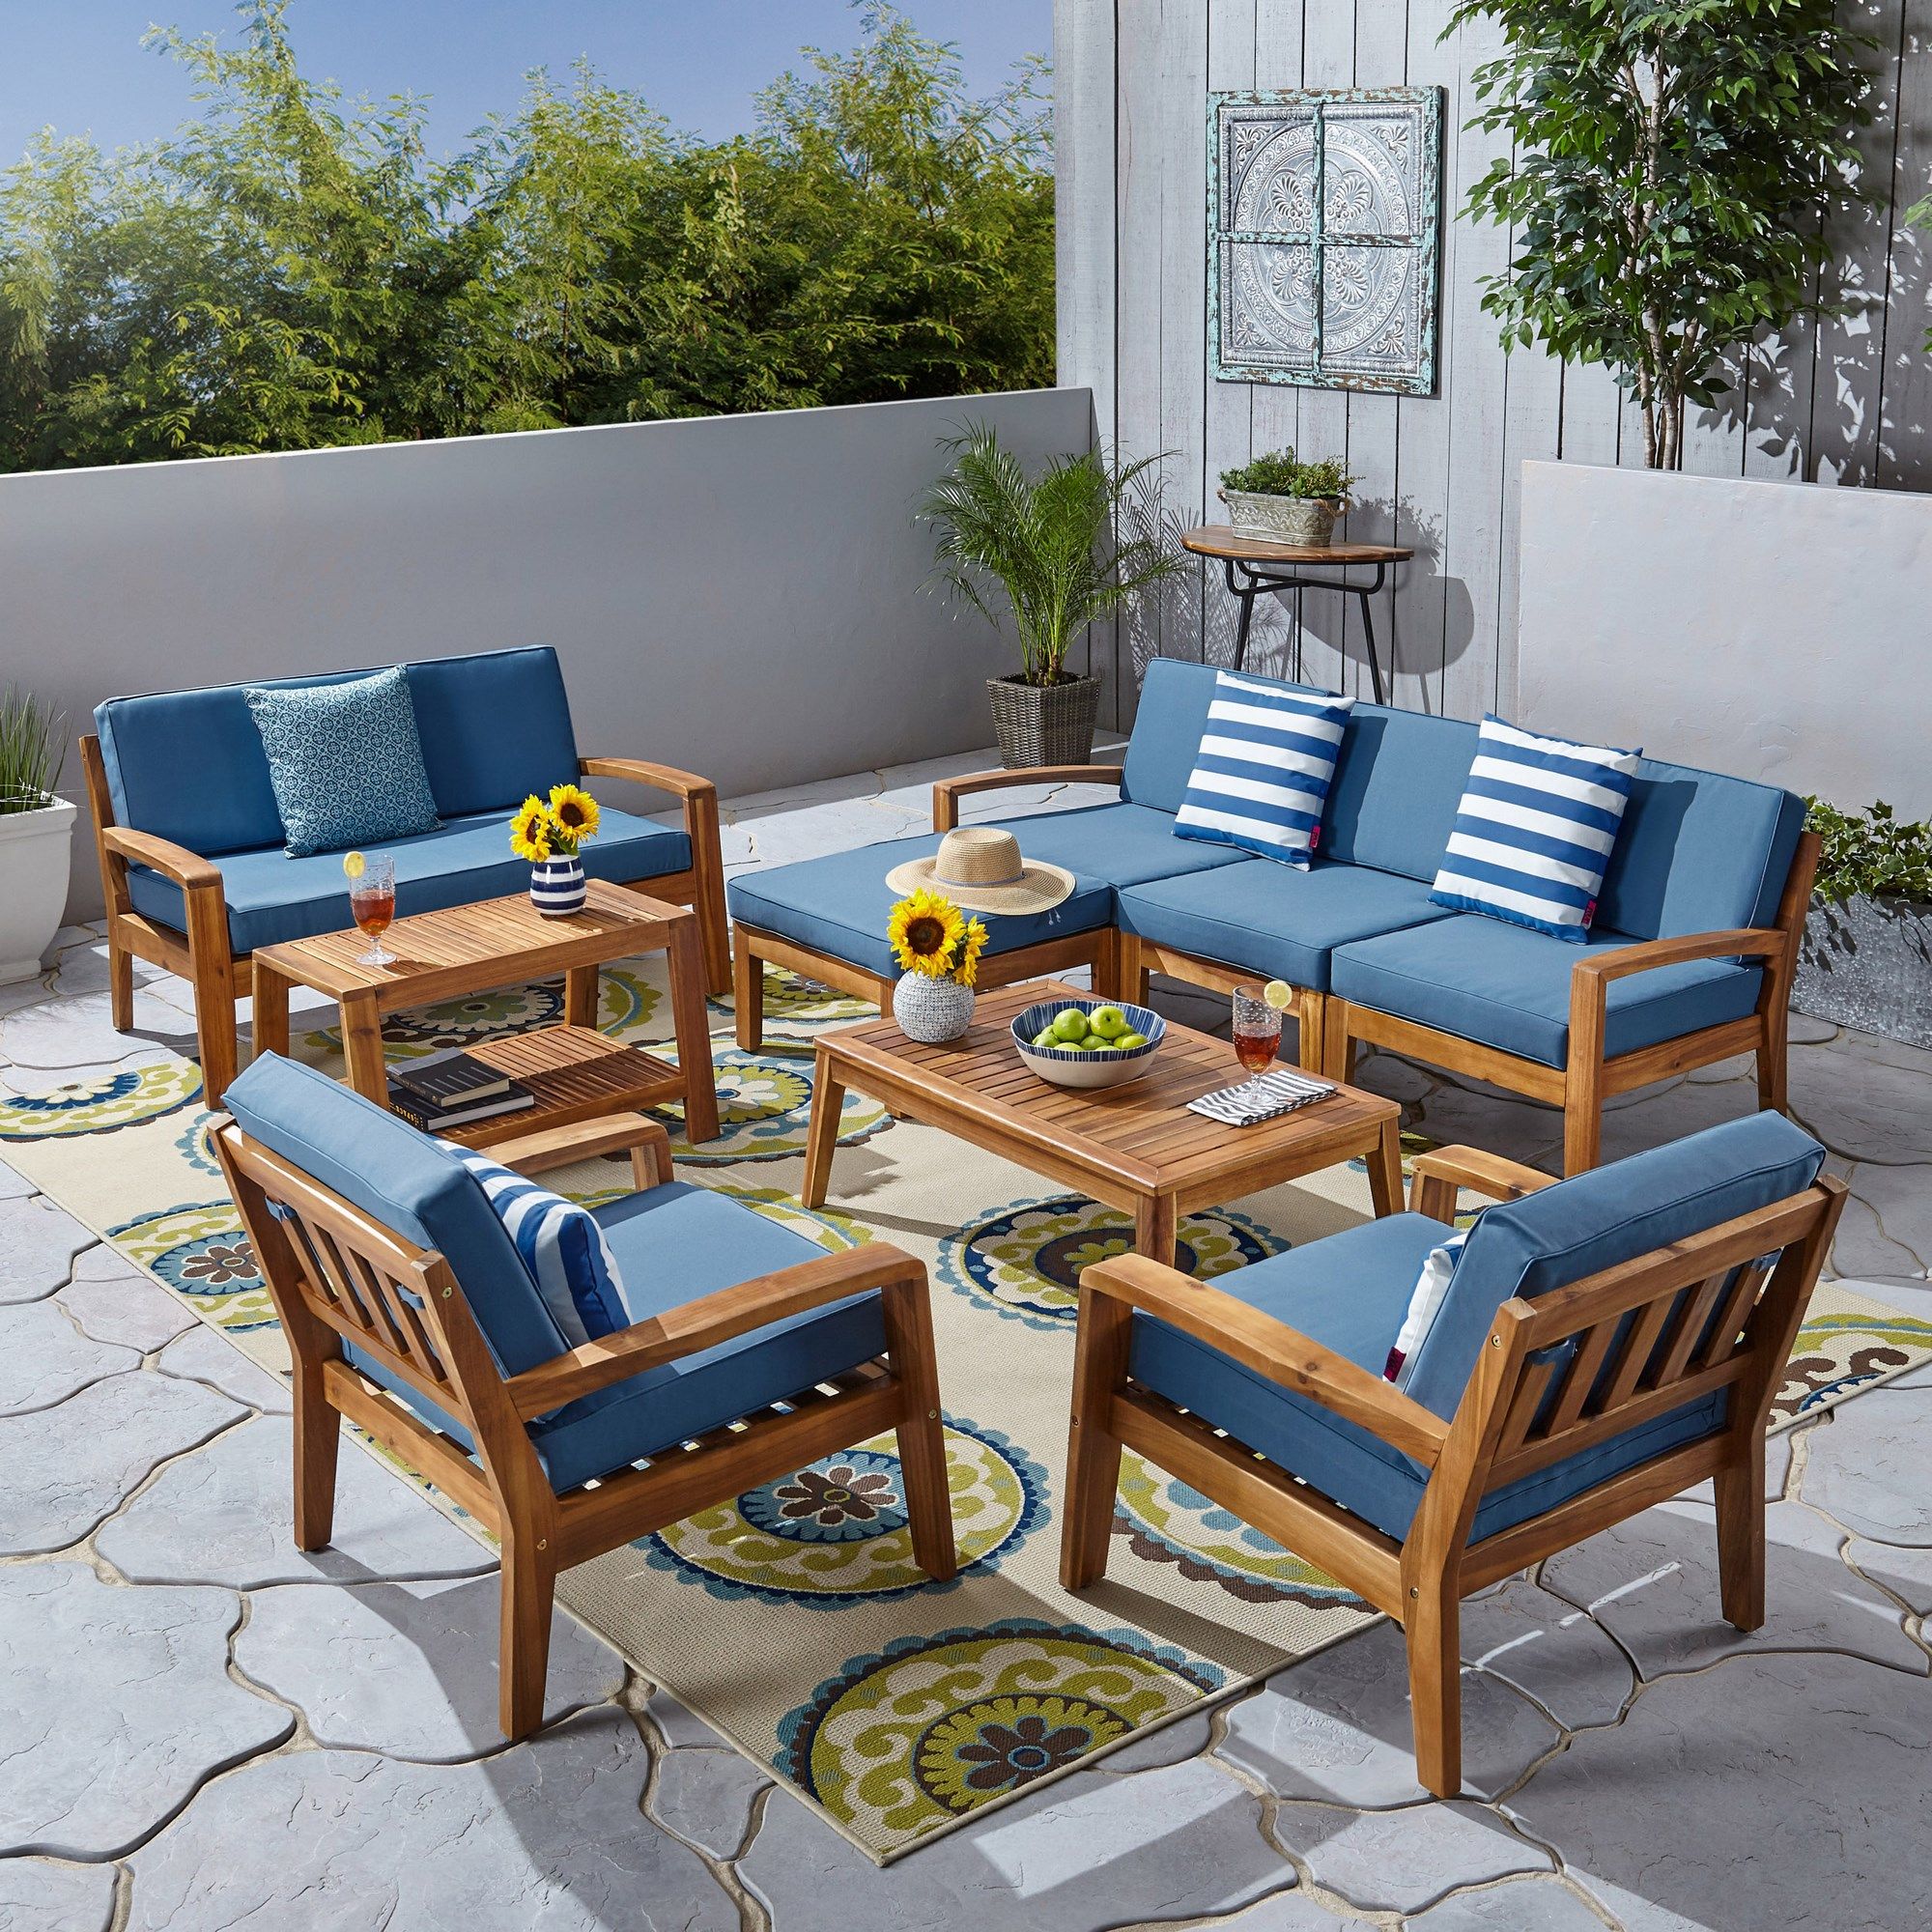 Grenada 7 Seater Sectional Sofa Set For Patio With Loveseat, Club Chairs,  Ottoman, And Coffee Tables, Acacia Wood, Teak Finish With Blue Outdoor  Cushions Pertaining To Outdoor Cushioned Chair Loveseat Tables (View 12 of 15)